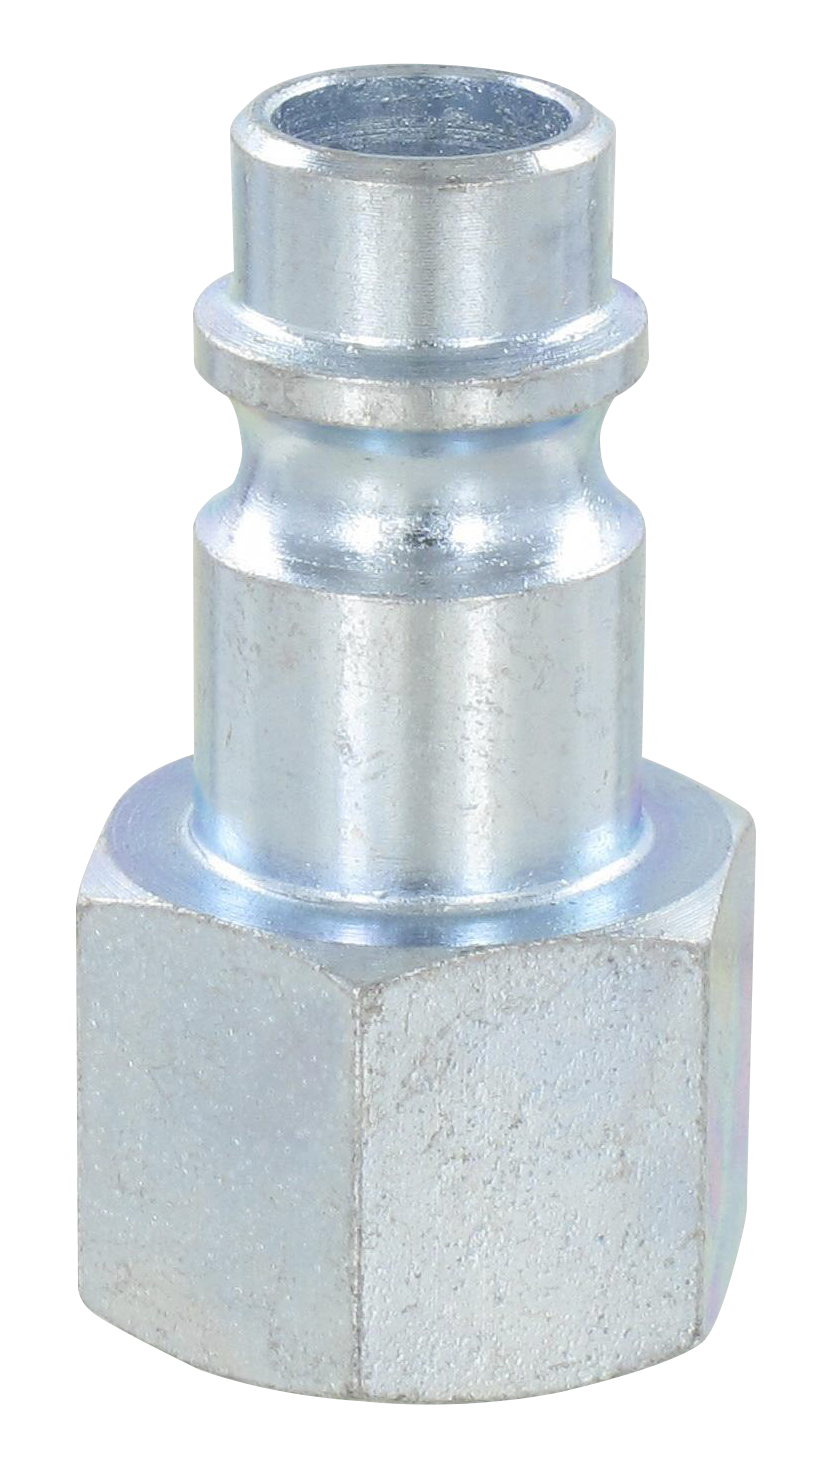 ZINC PLATED EURO FEMALE PLUG Fittings and quick-connect couplings